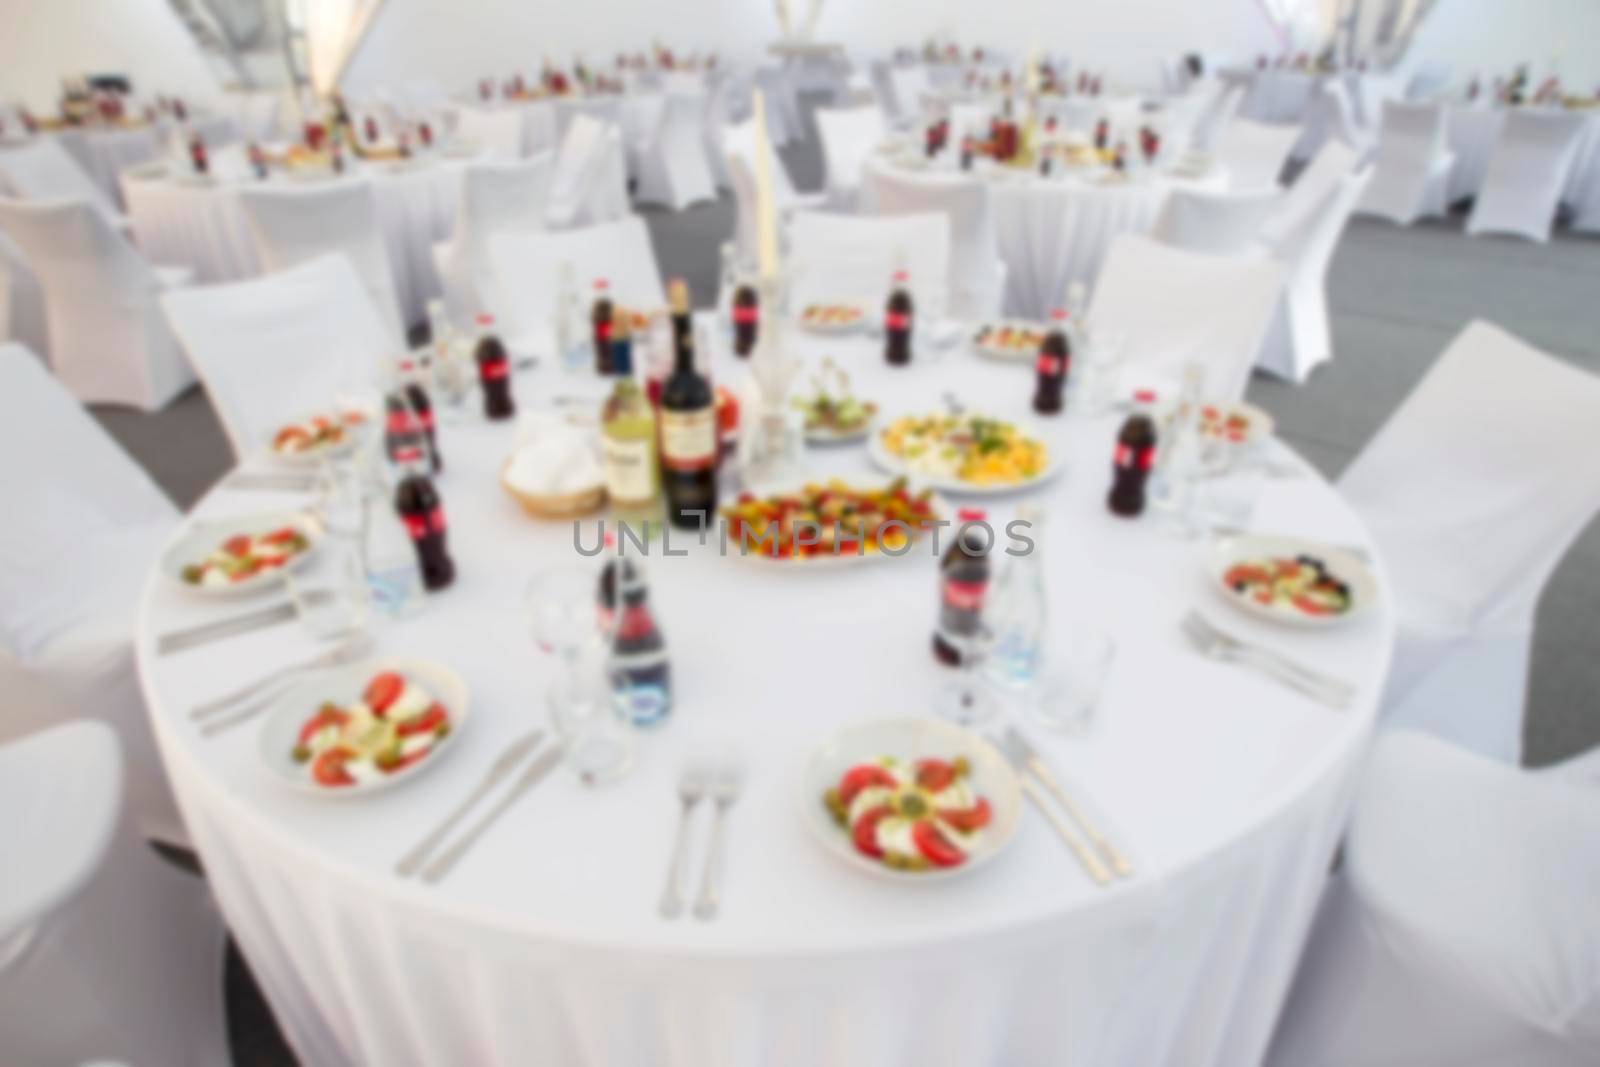 Blurred image of a table set with food.